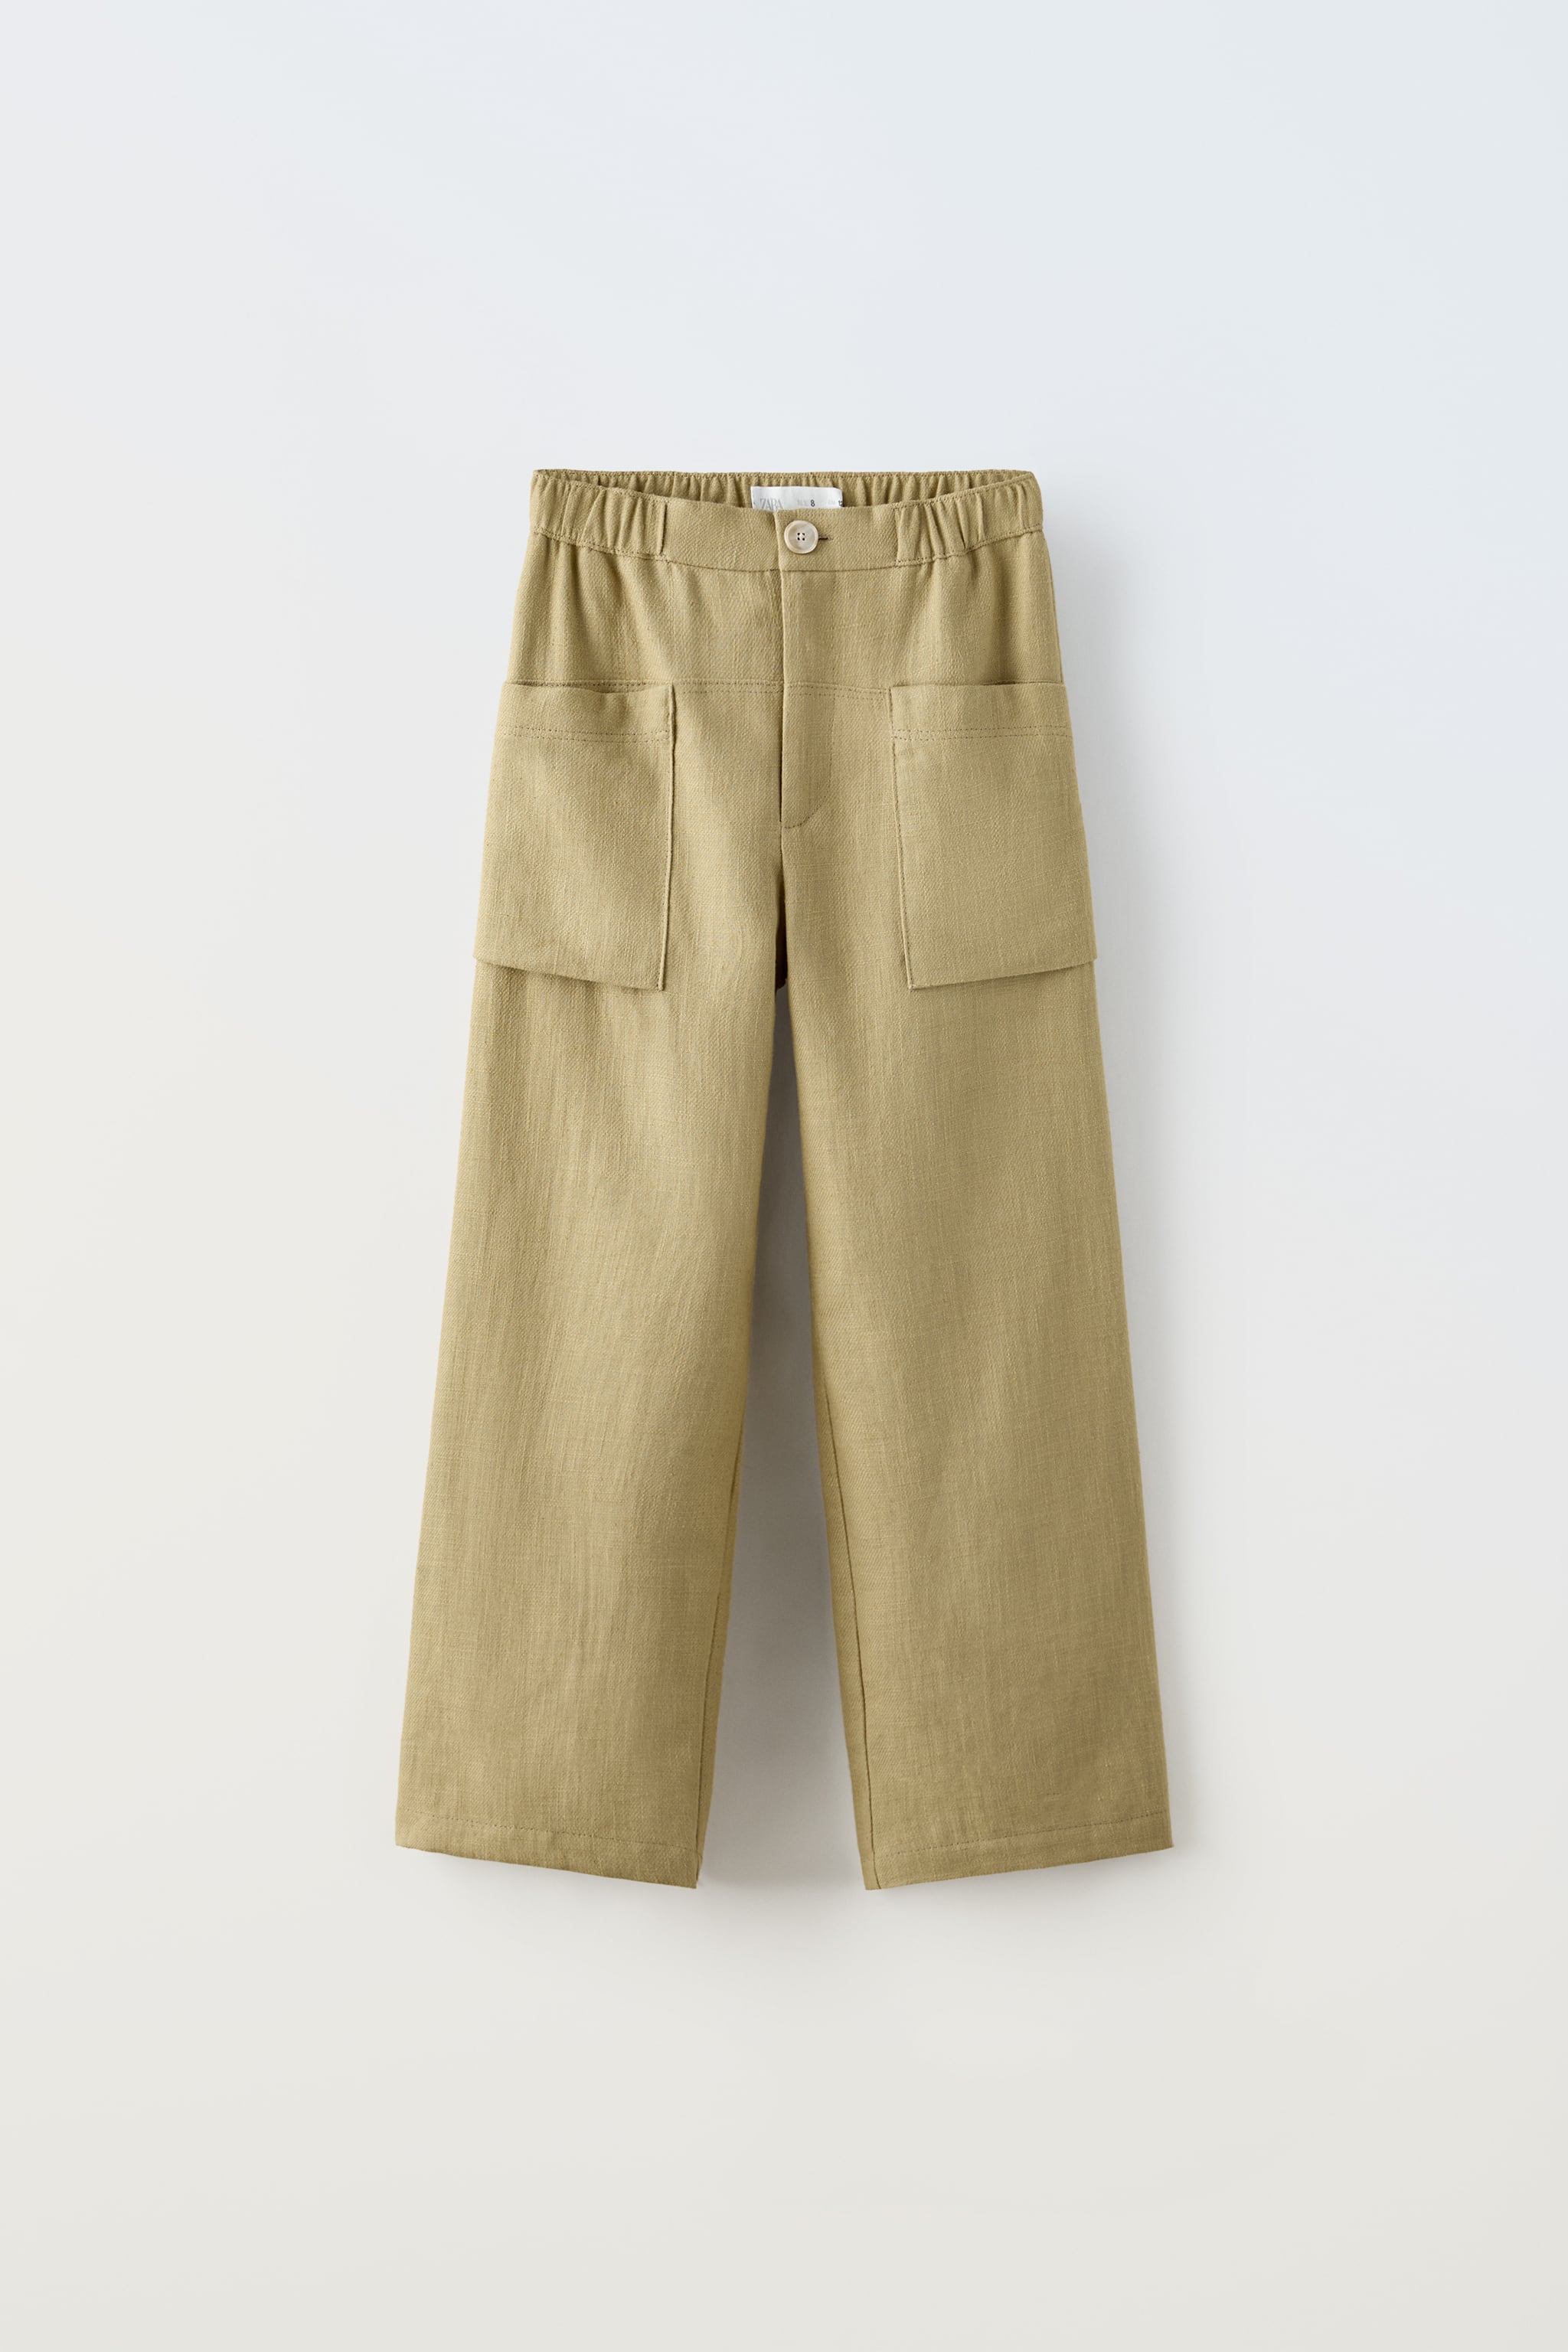 RAMIE BLEND PANTS WITH POCKETS